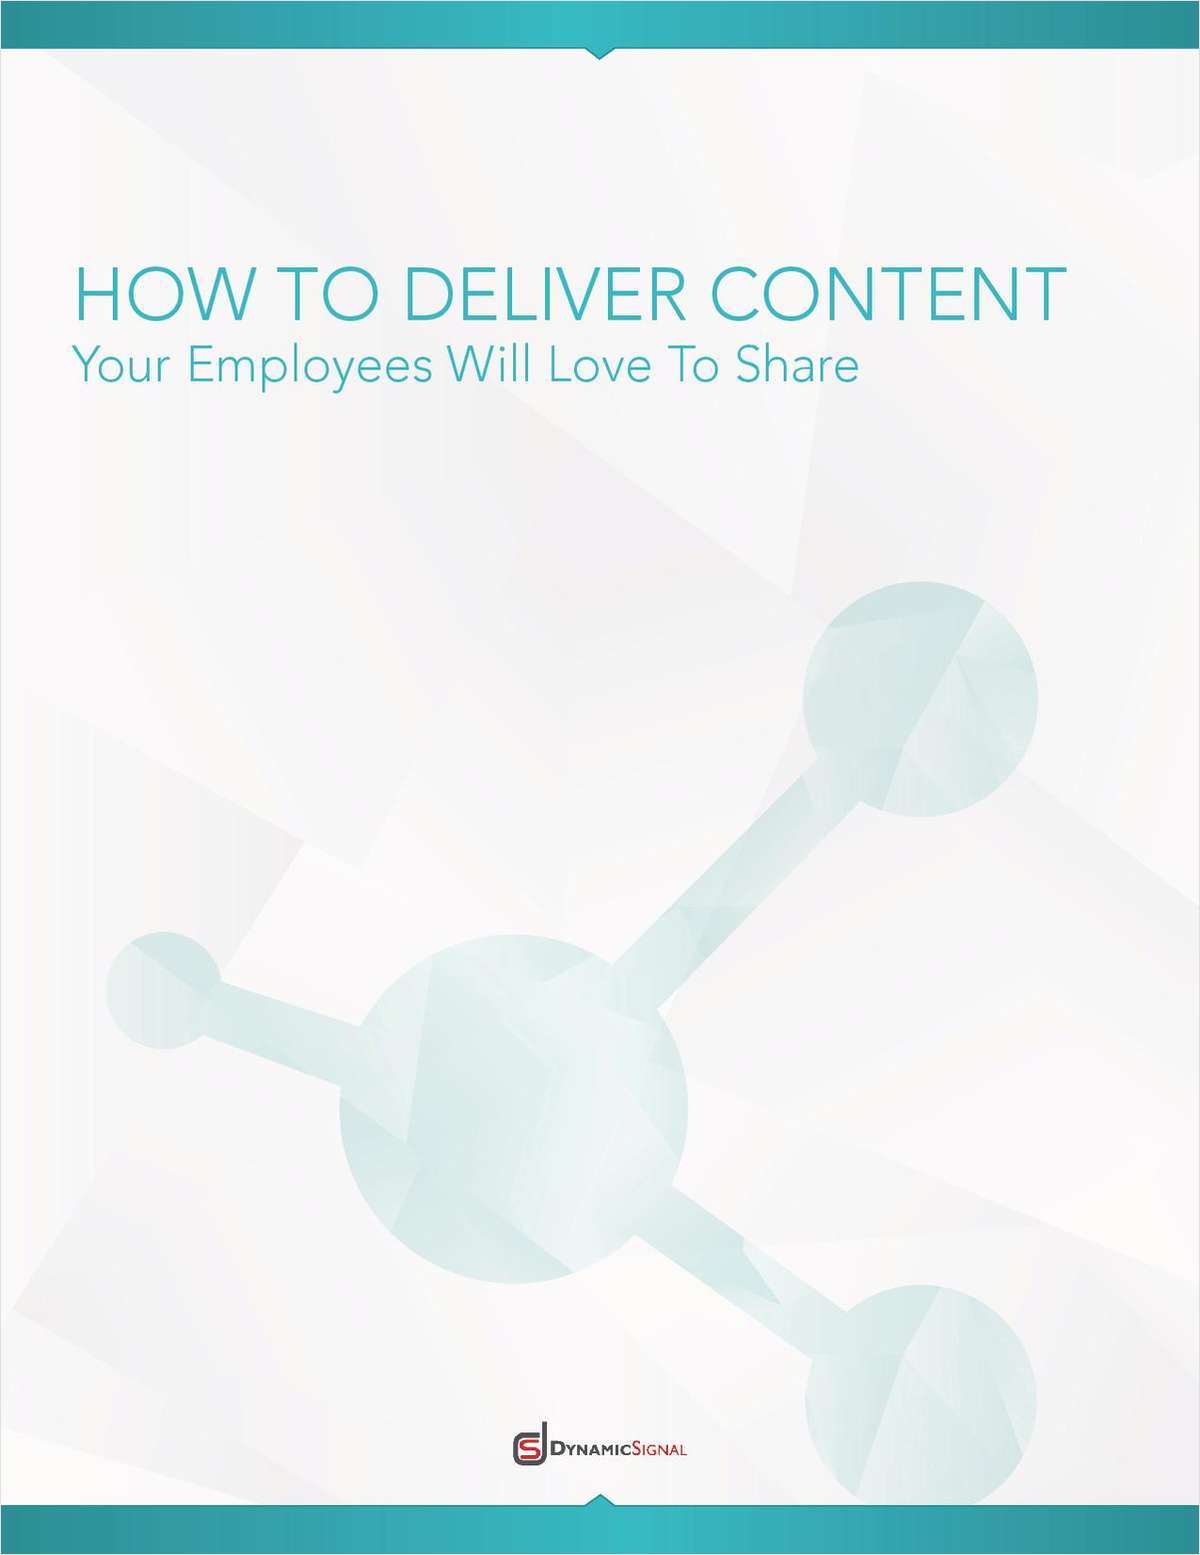 How to Deliver Content Your Employees Will Love to Share